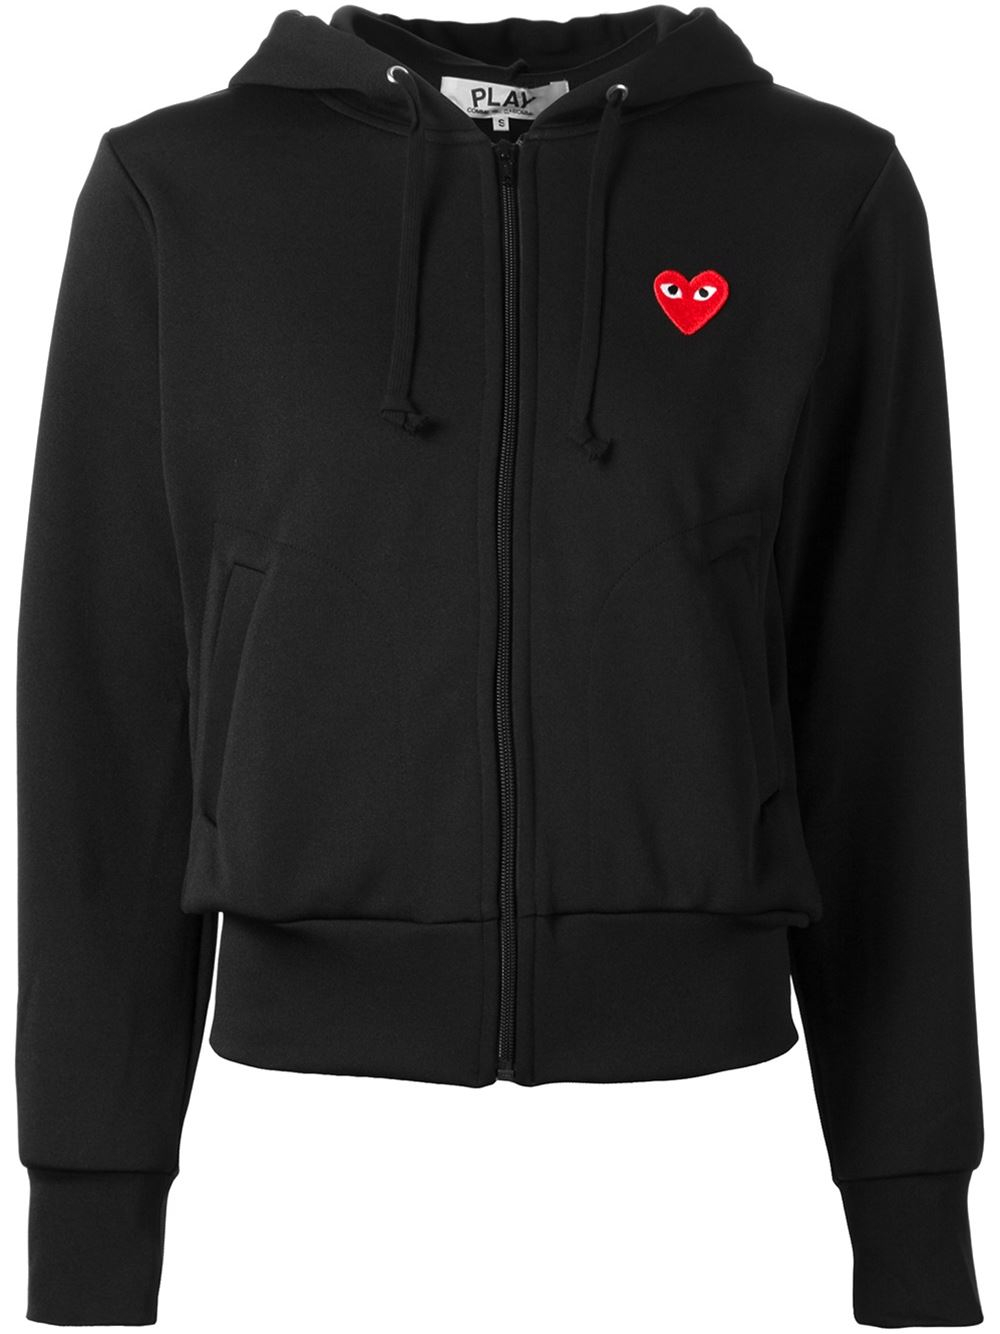 Play comme des garçons Embroidered Heart Hoodie in Black | Lyst